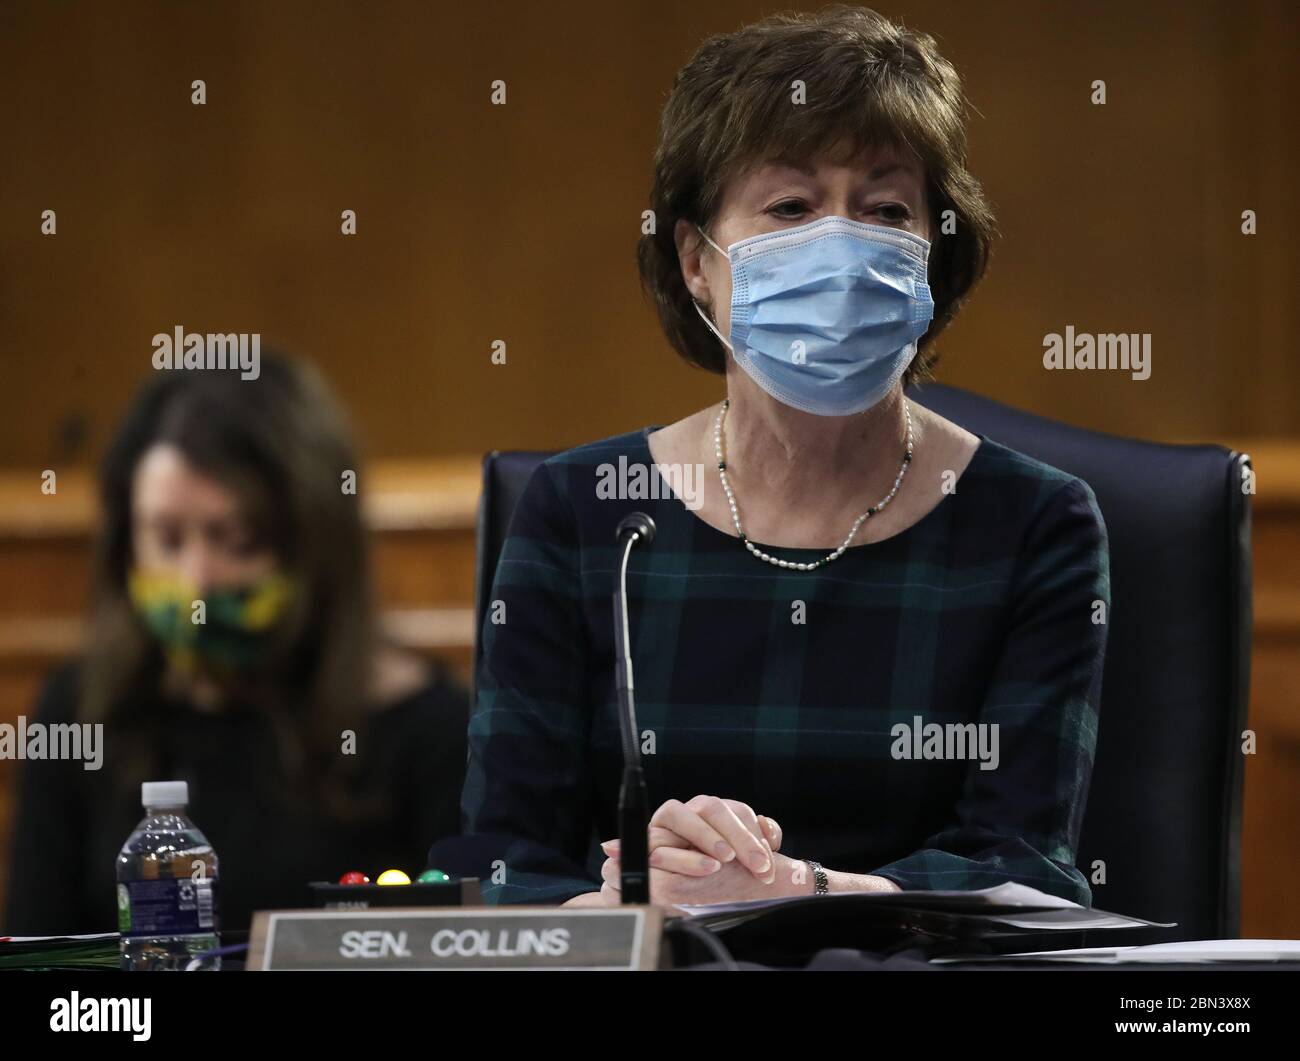 Washington, United States. 12th May, 2020. Sen. Susan Collins (R-ME) wears a mask while participating in a Senate Health, Education, Labor and Pensions Committee hearing on Capitol Hill on Tuesday, May 12, 2020 in Washington, DC. The committee is hearing testimony from members of the White House Coronavirus Task Force on how to safely reopen the country. Chairman Lamar Alexander and the witnesses are all in self-quarantine since they have been exposed to the virus. Stock Photo